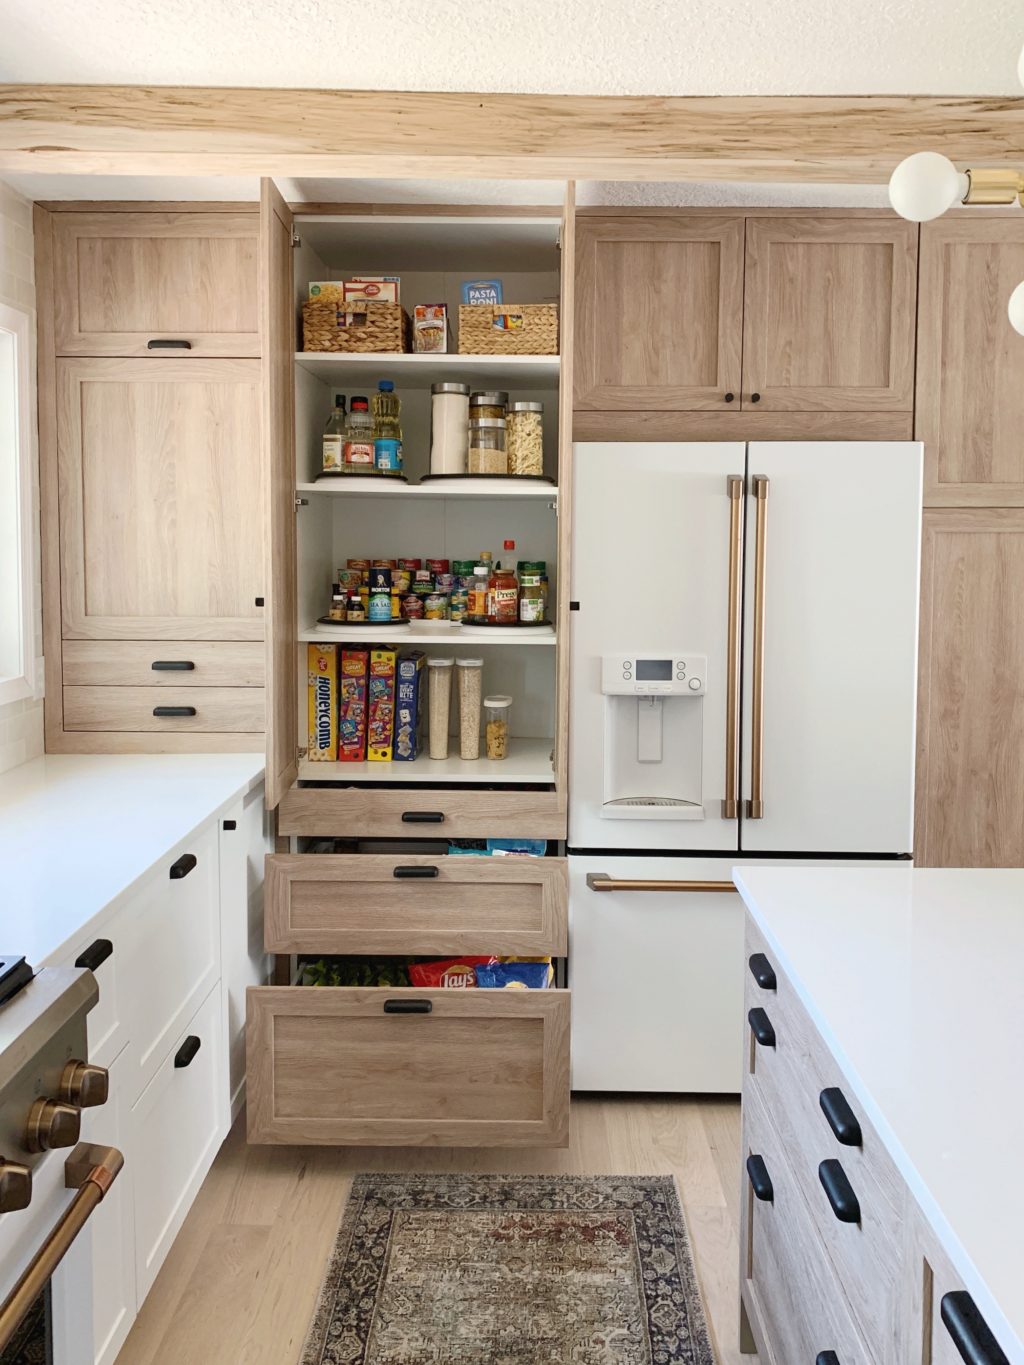 How to Organize the Inside of Kitchen Cabinets - Life Love Larson